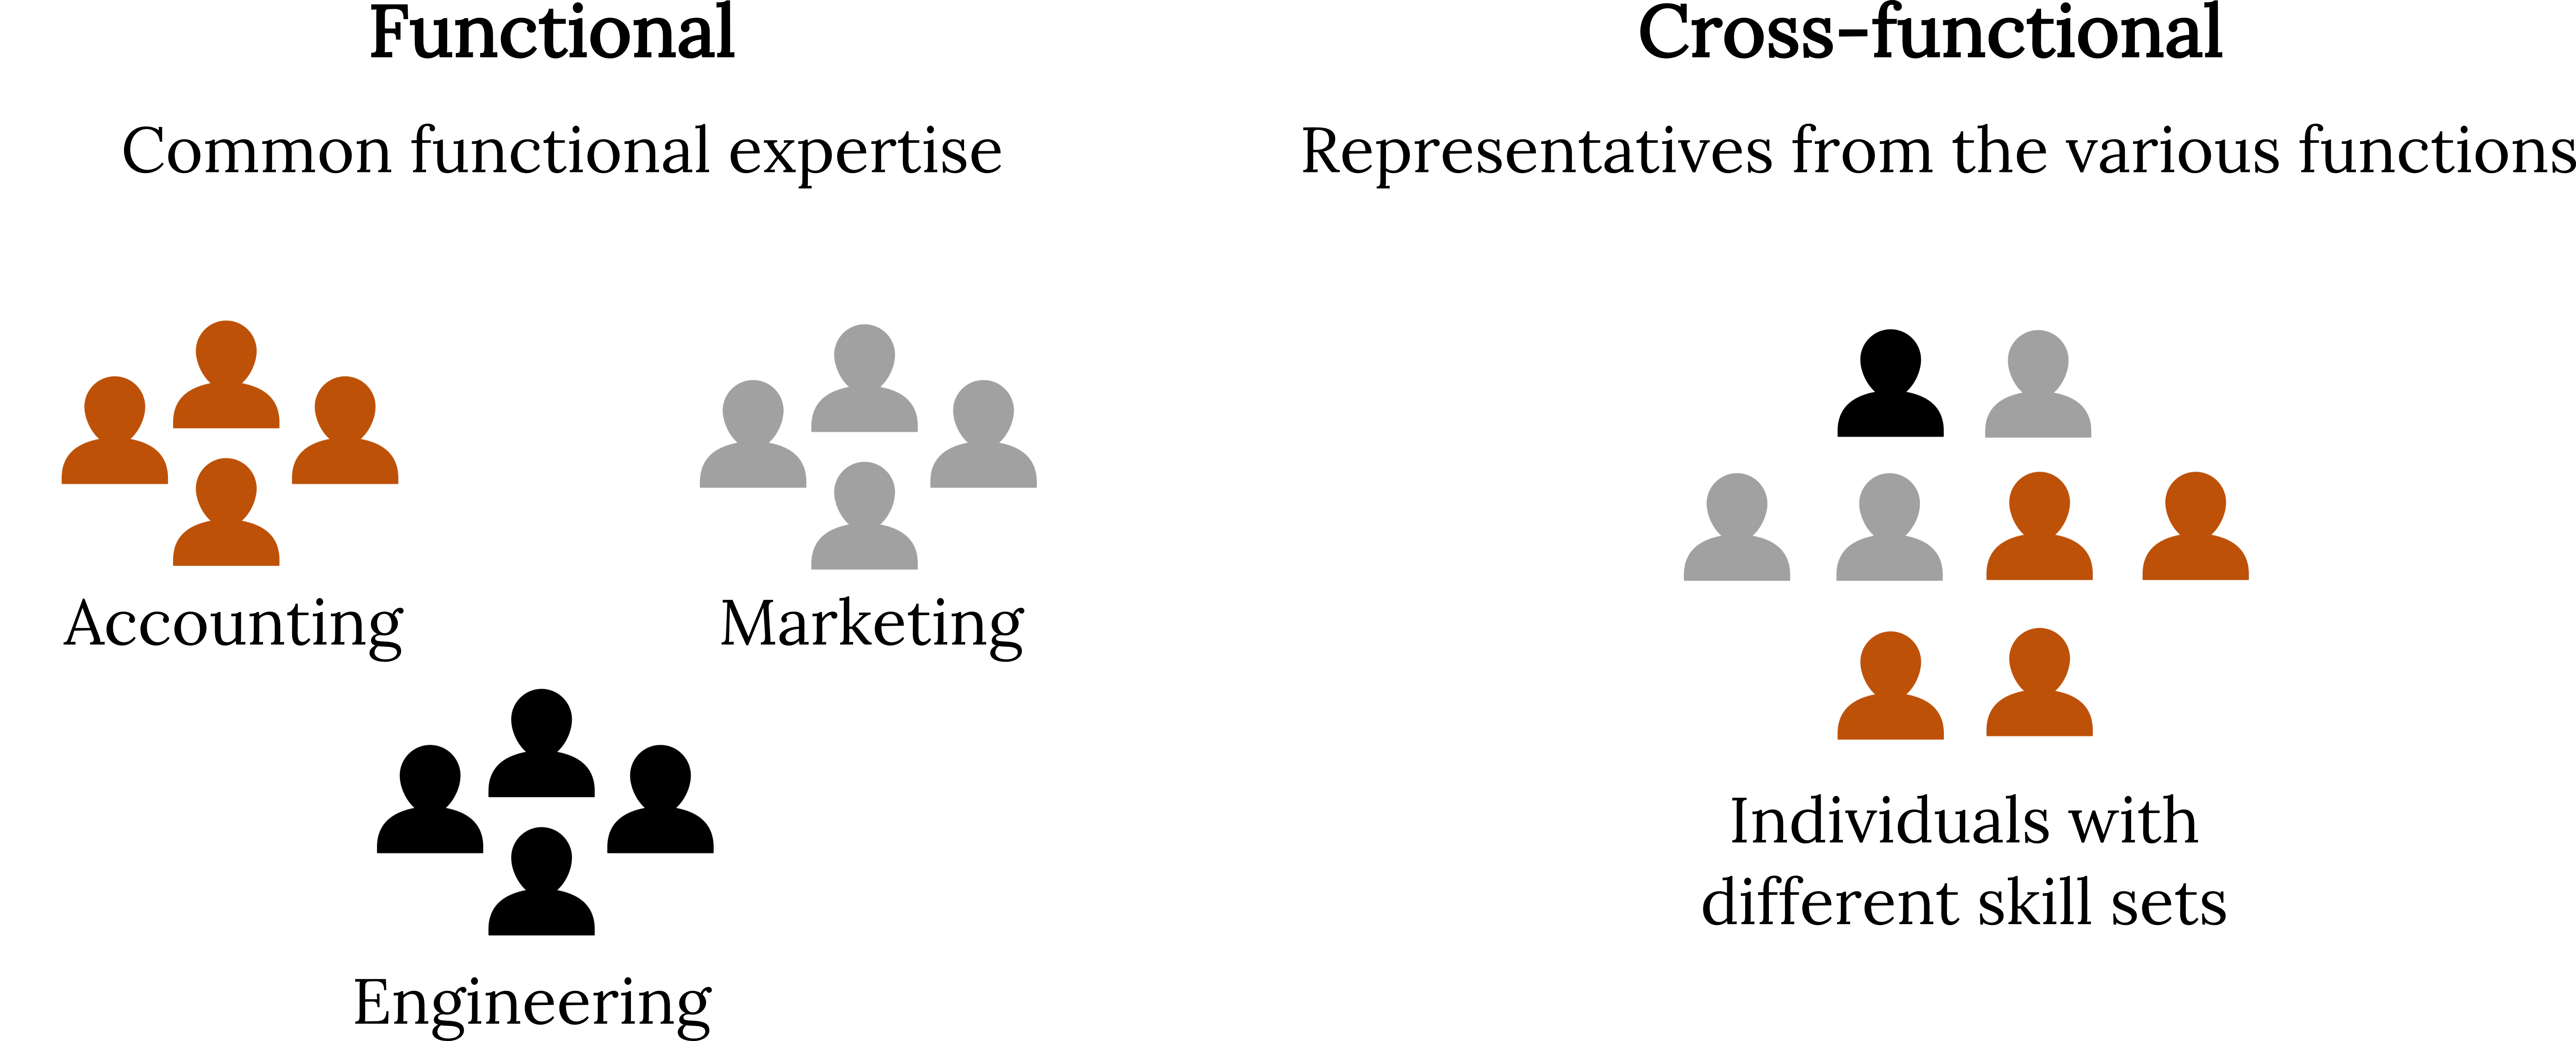 On the left: 'Functional: common functional expertise' below it are 3 separate groups of people including accounting, marketing, and engineering. On the right: 'Cross-Functional: representatives from the various functions' below it is one group with individuals from all three of the previous groups, labeled 'individuals with different skill sets'